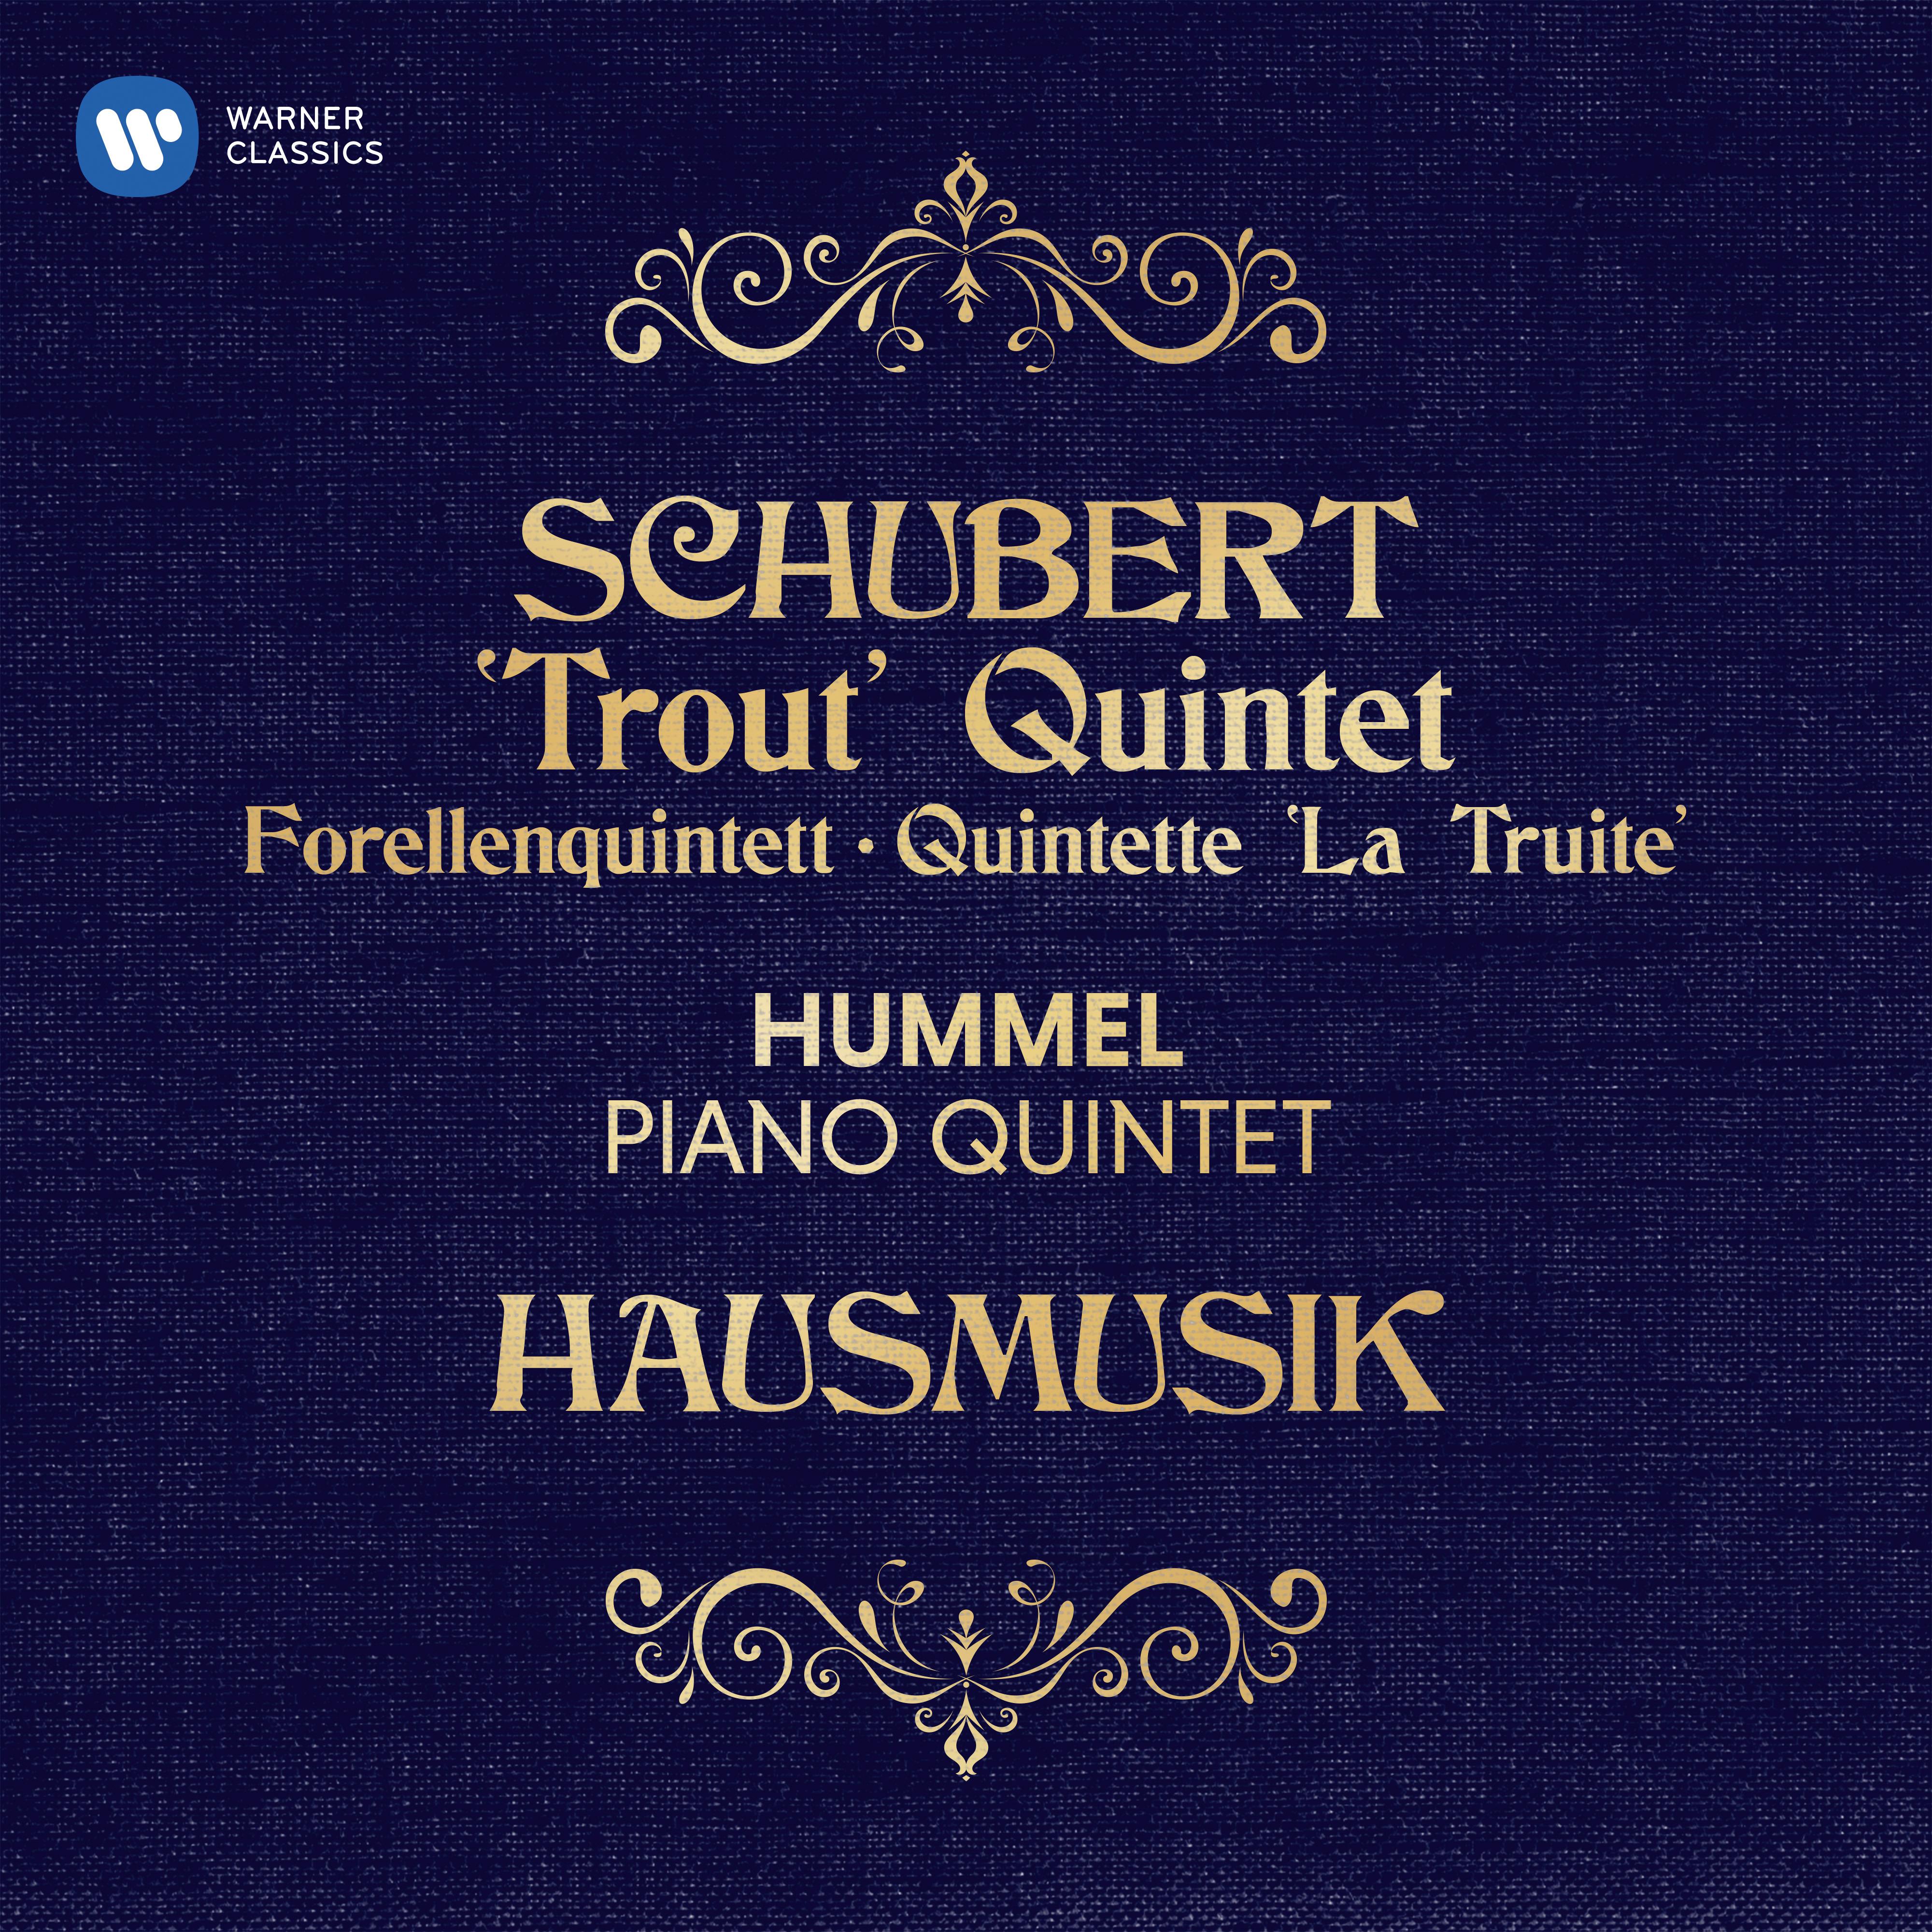 Piano Quintet in A Major, Op. Posth. 114, D. 667 "The Trout":V. Finale. Allegro giusto